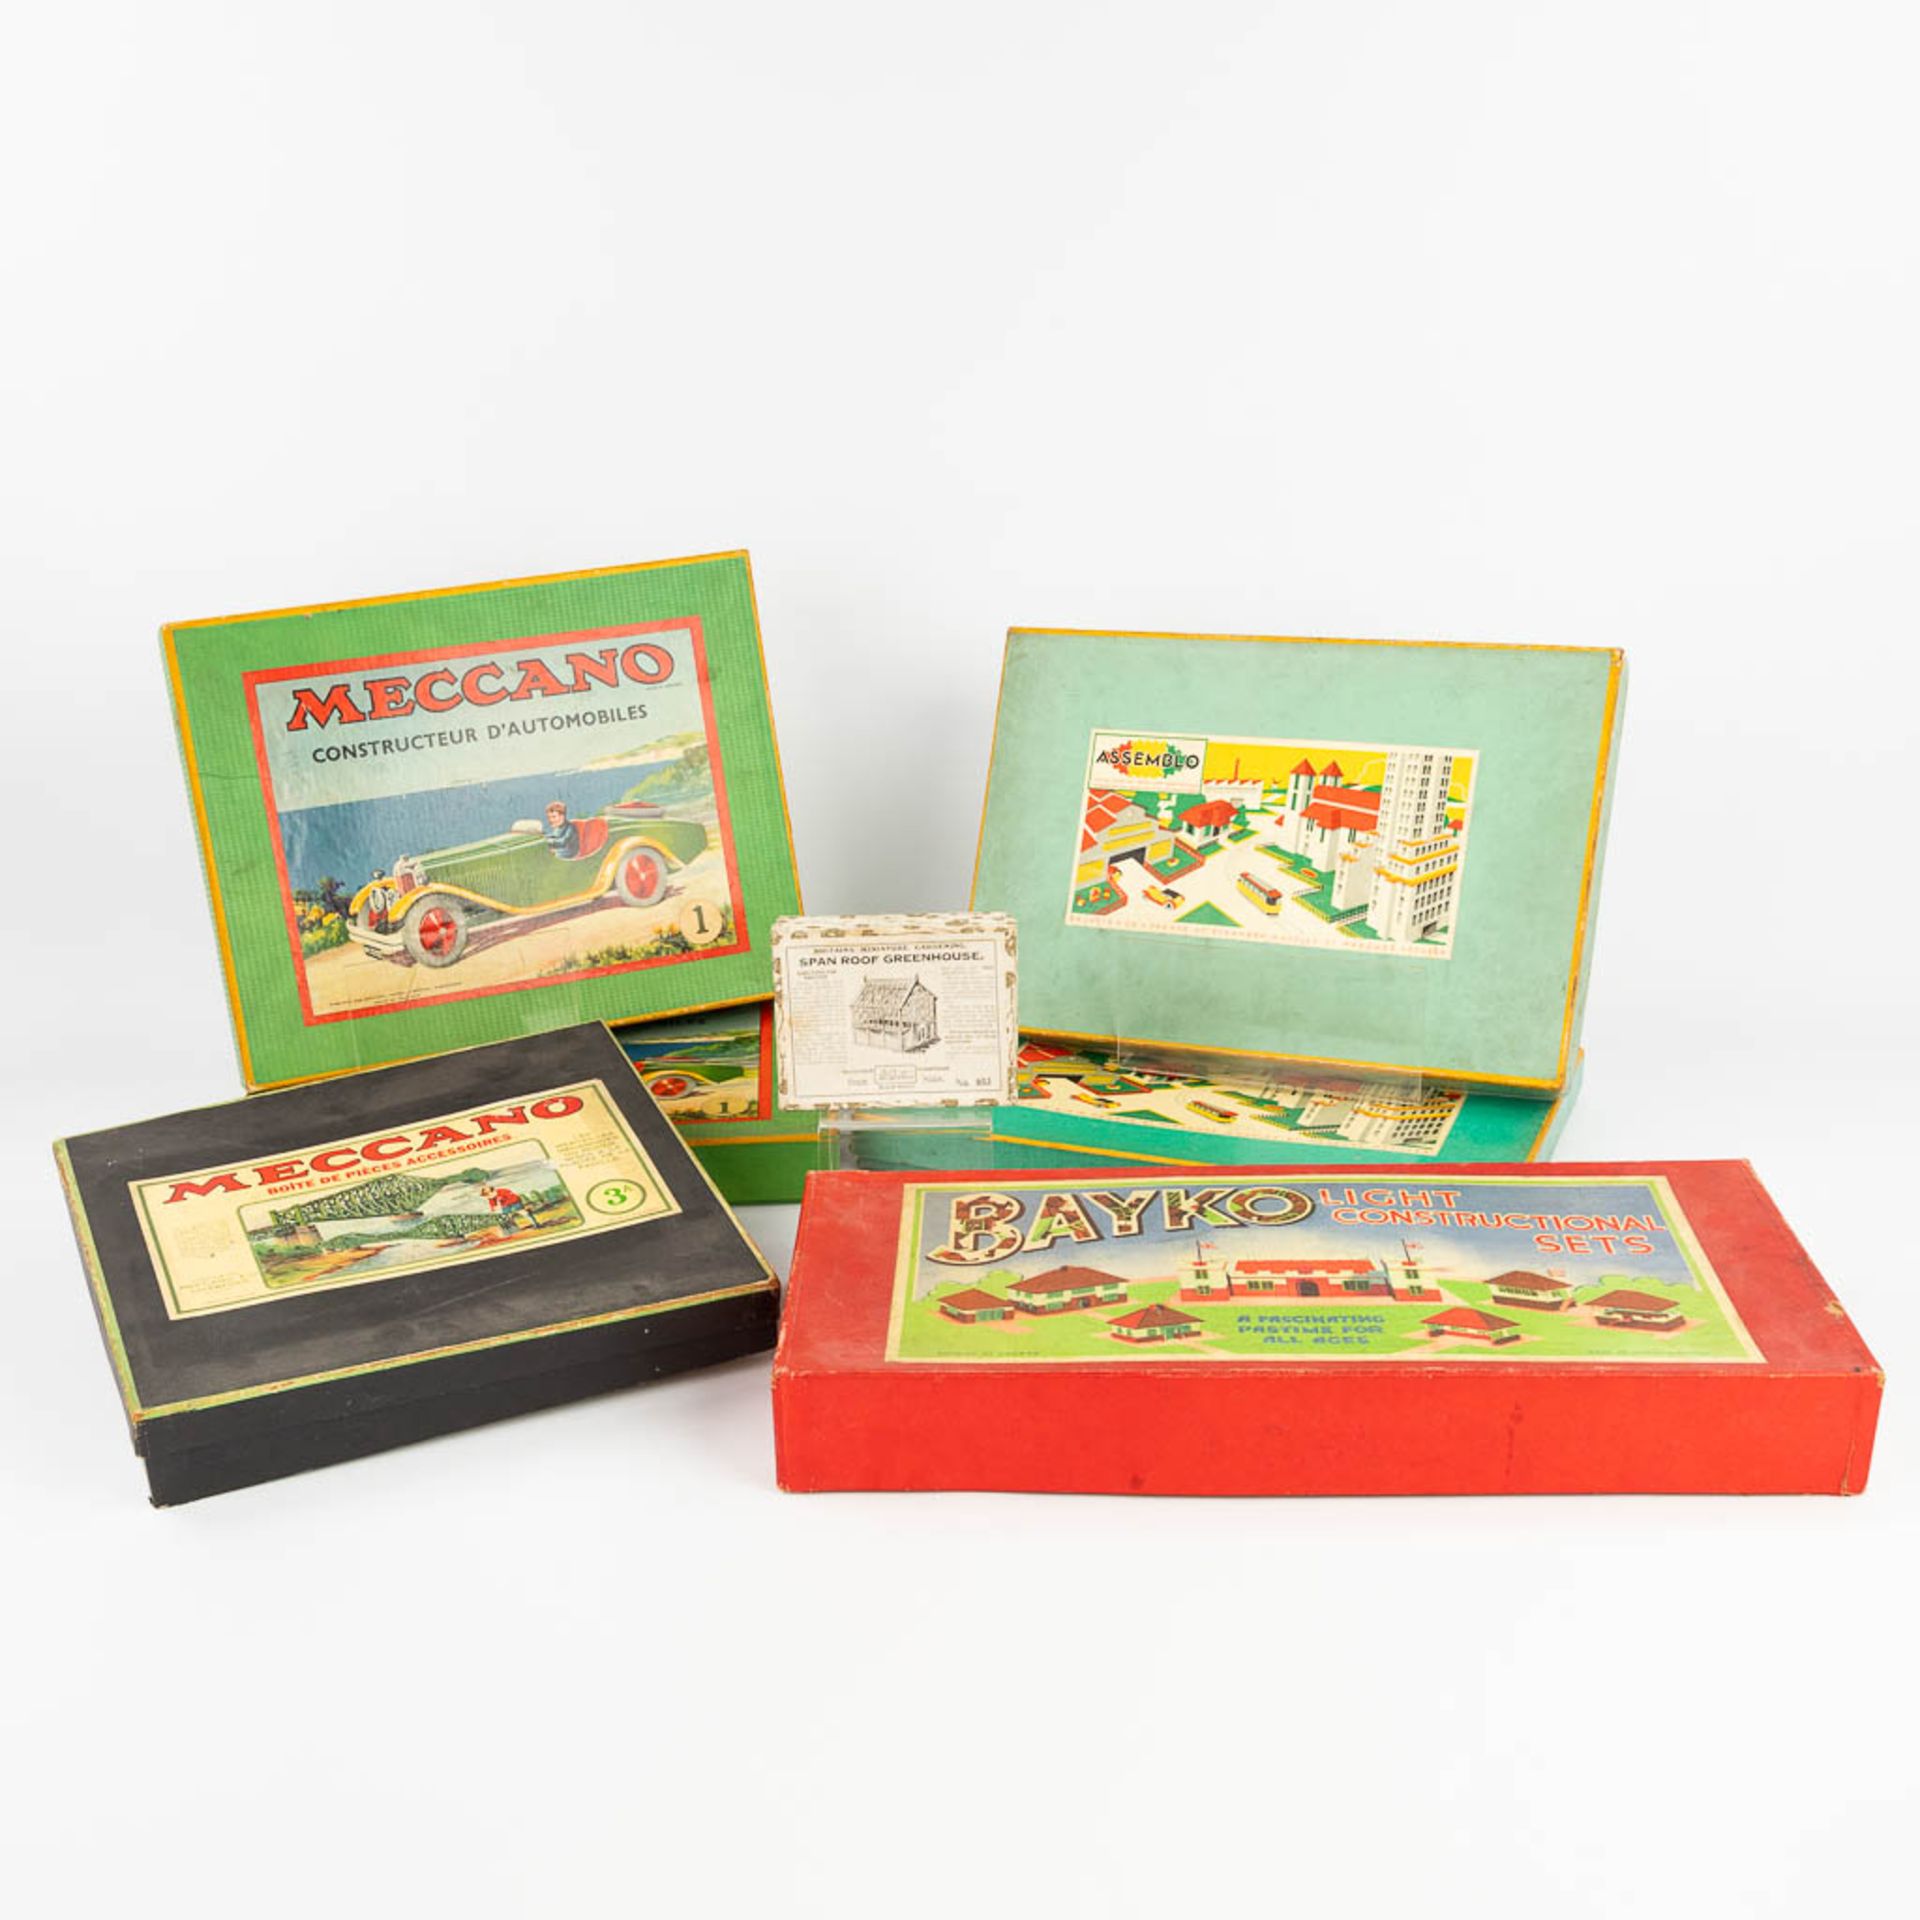 Meccano, Bayco and Assemblo, a collection 4 boxes of mid-century toys. Circa 1960. (L:30 x W:39 x H